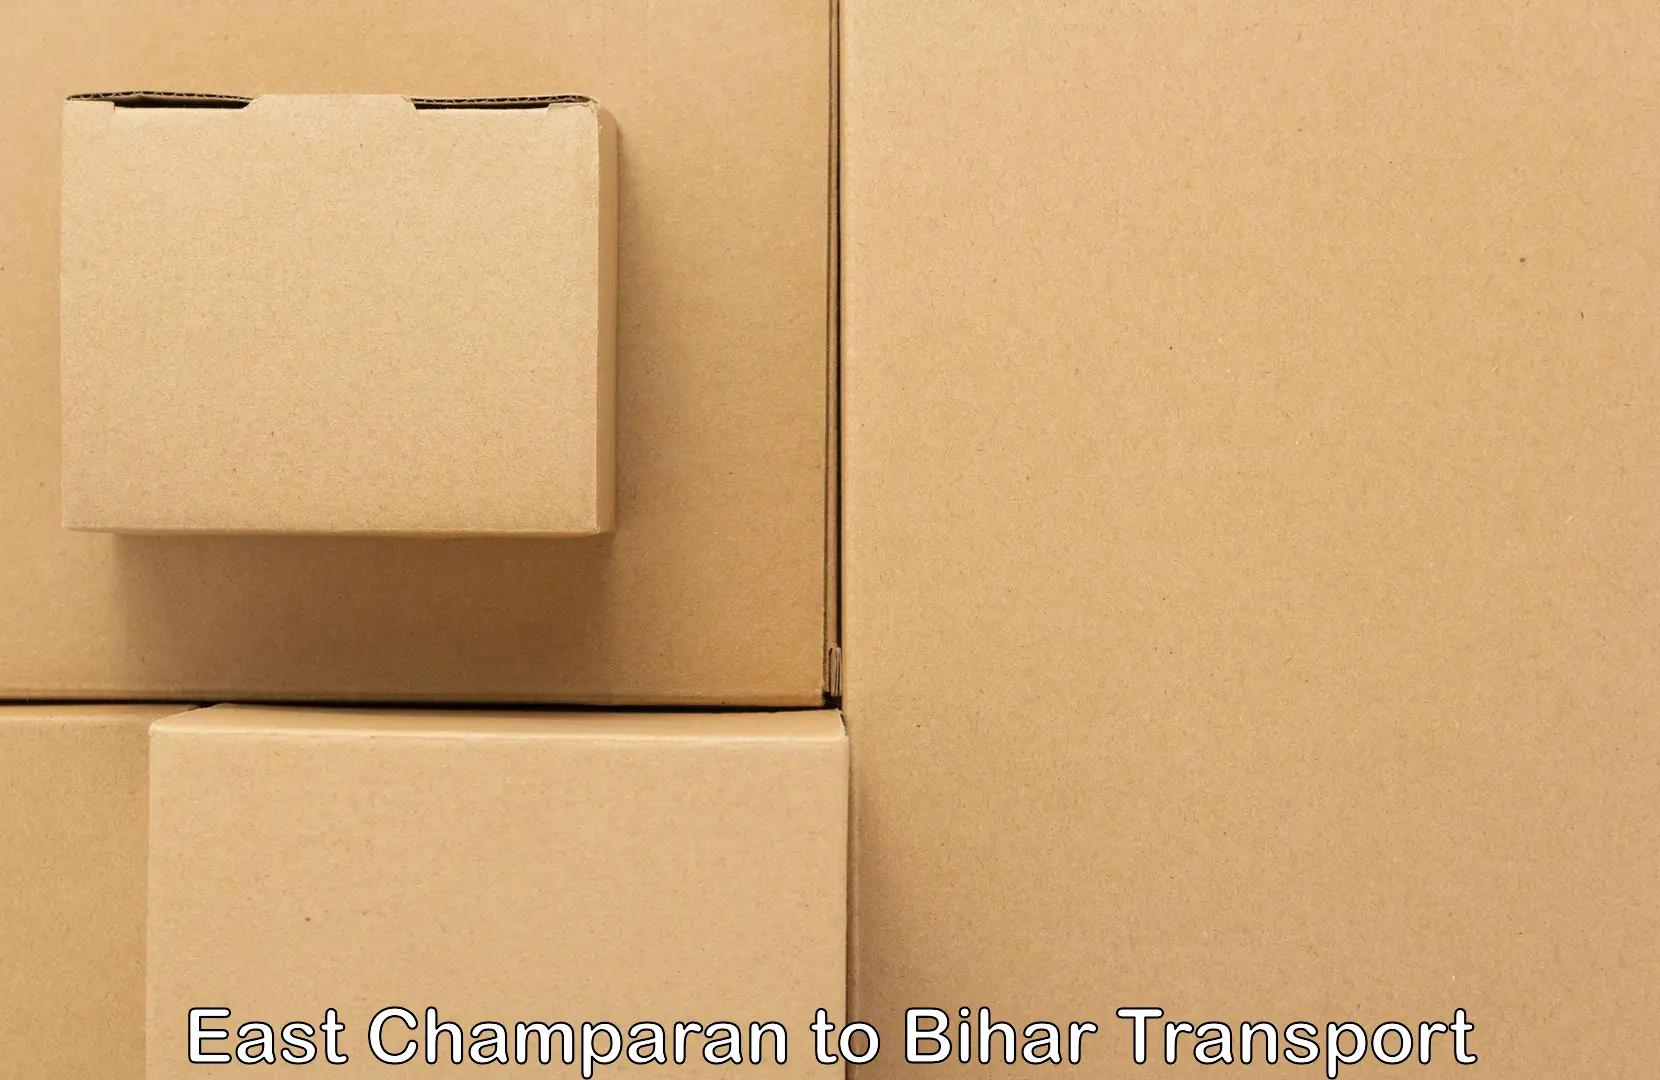 Shipping partner East Champaran to Sultanganj